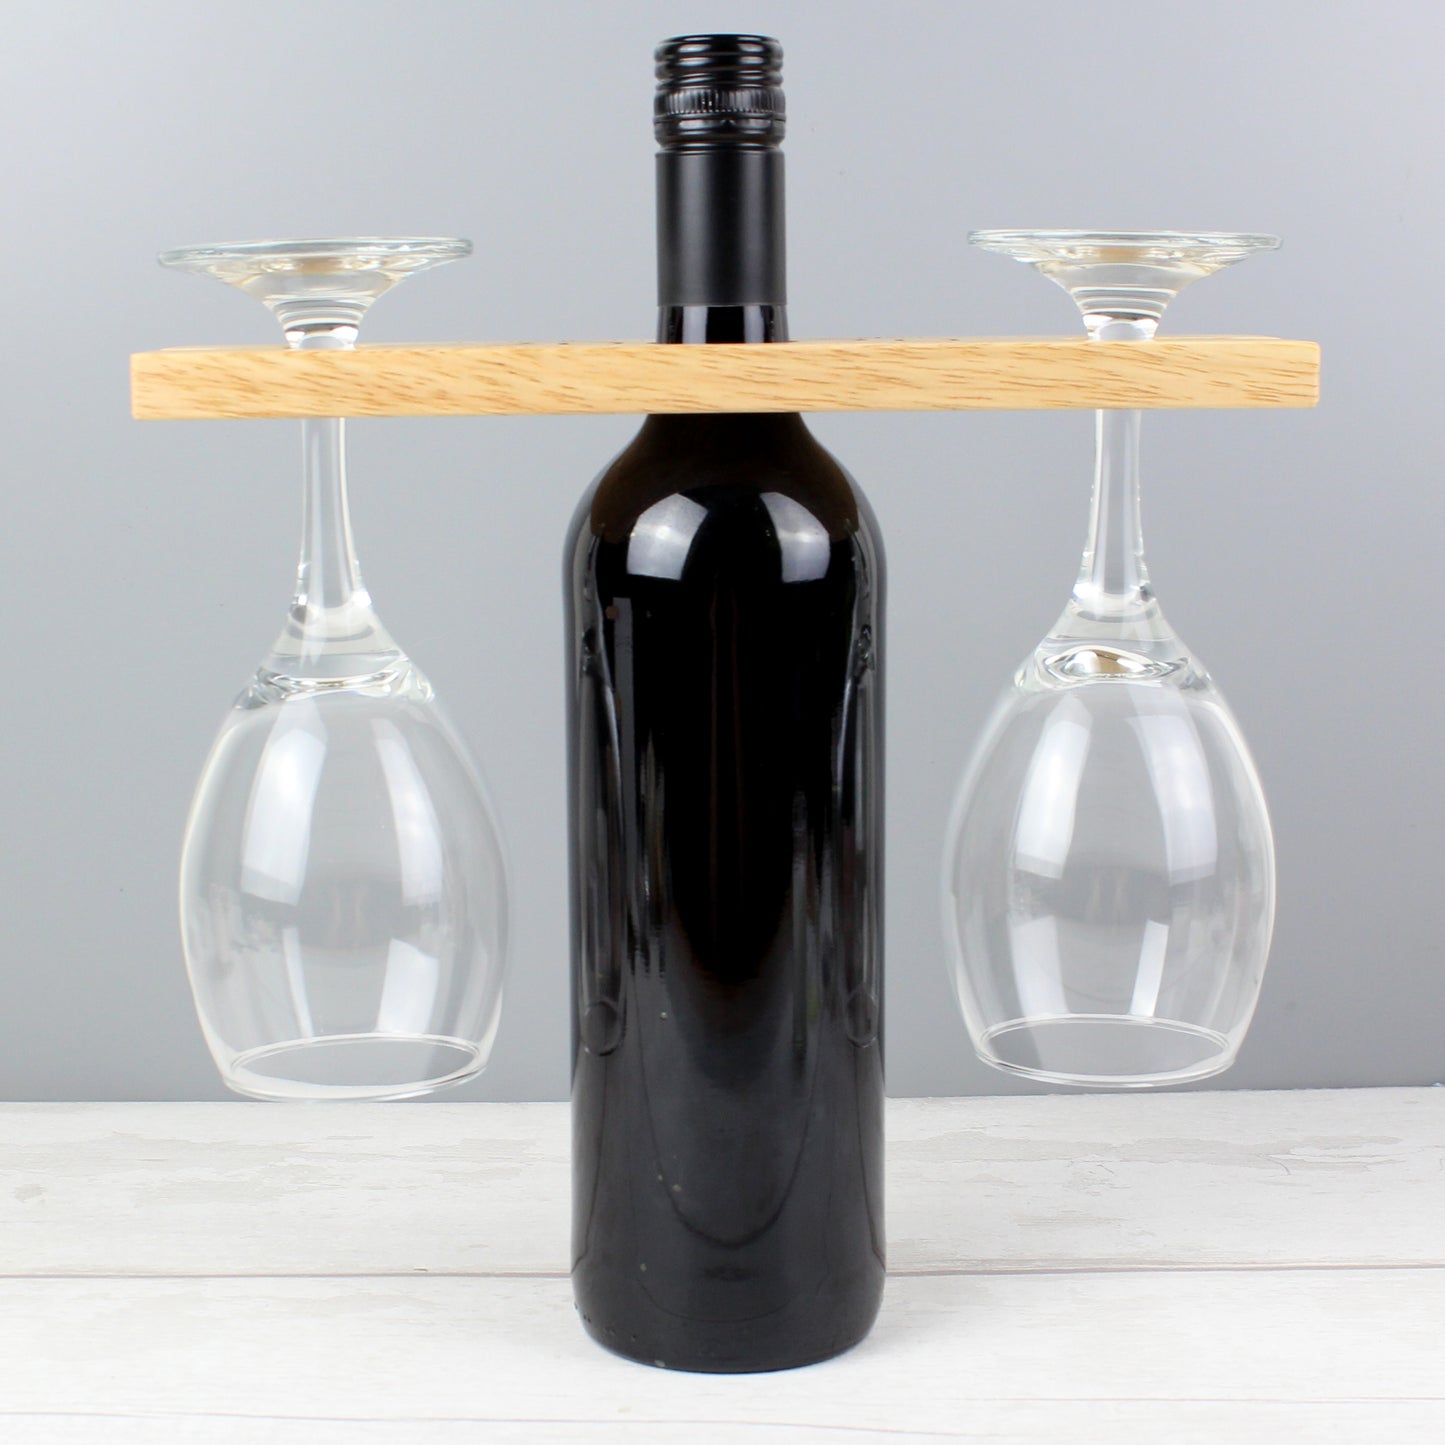 'Year' wine glass and bottle butler - Lilybet loves